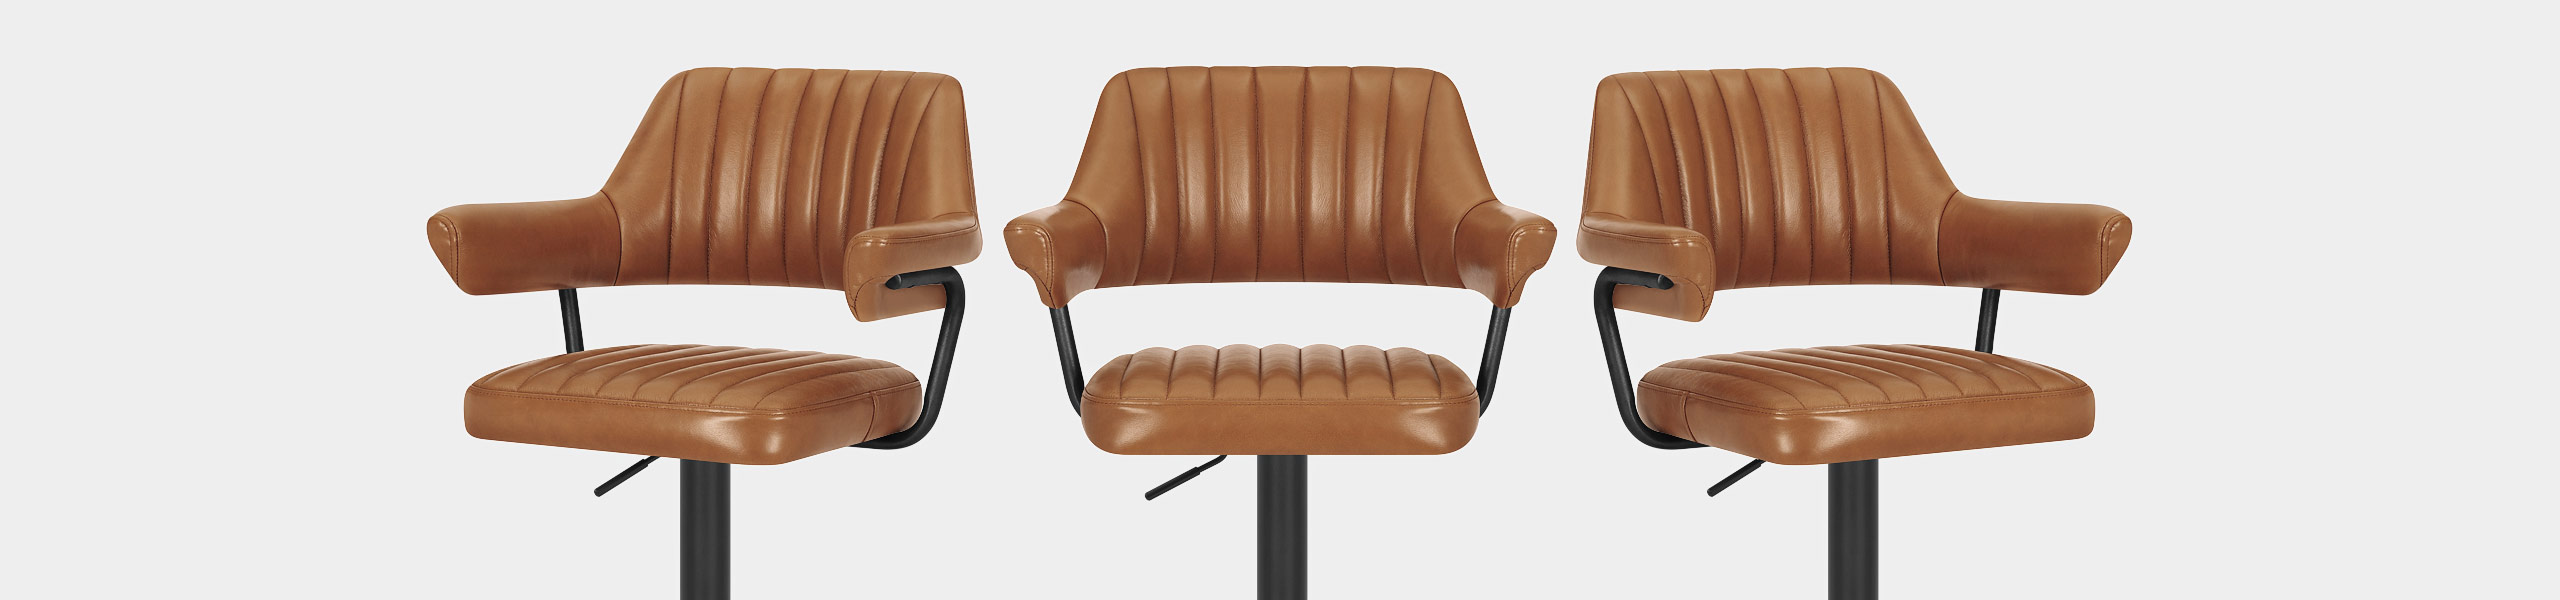 Scout Real Leather Stool Brown Video Banner